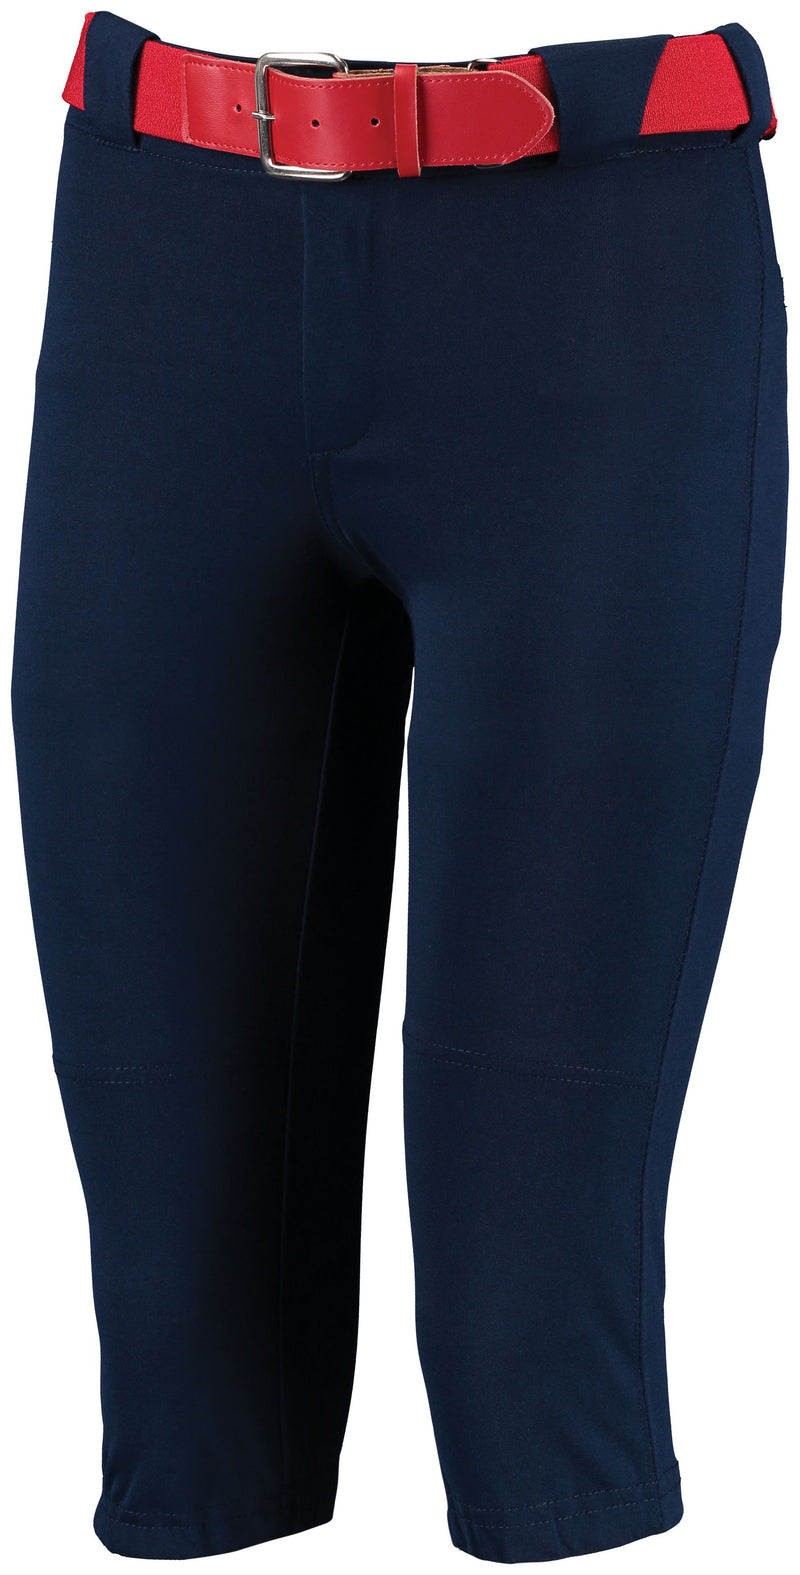 Russell Youth Low Rise Knicker Length Softball Pants